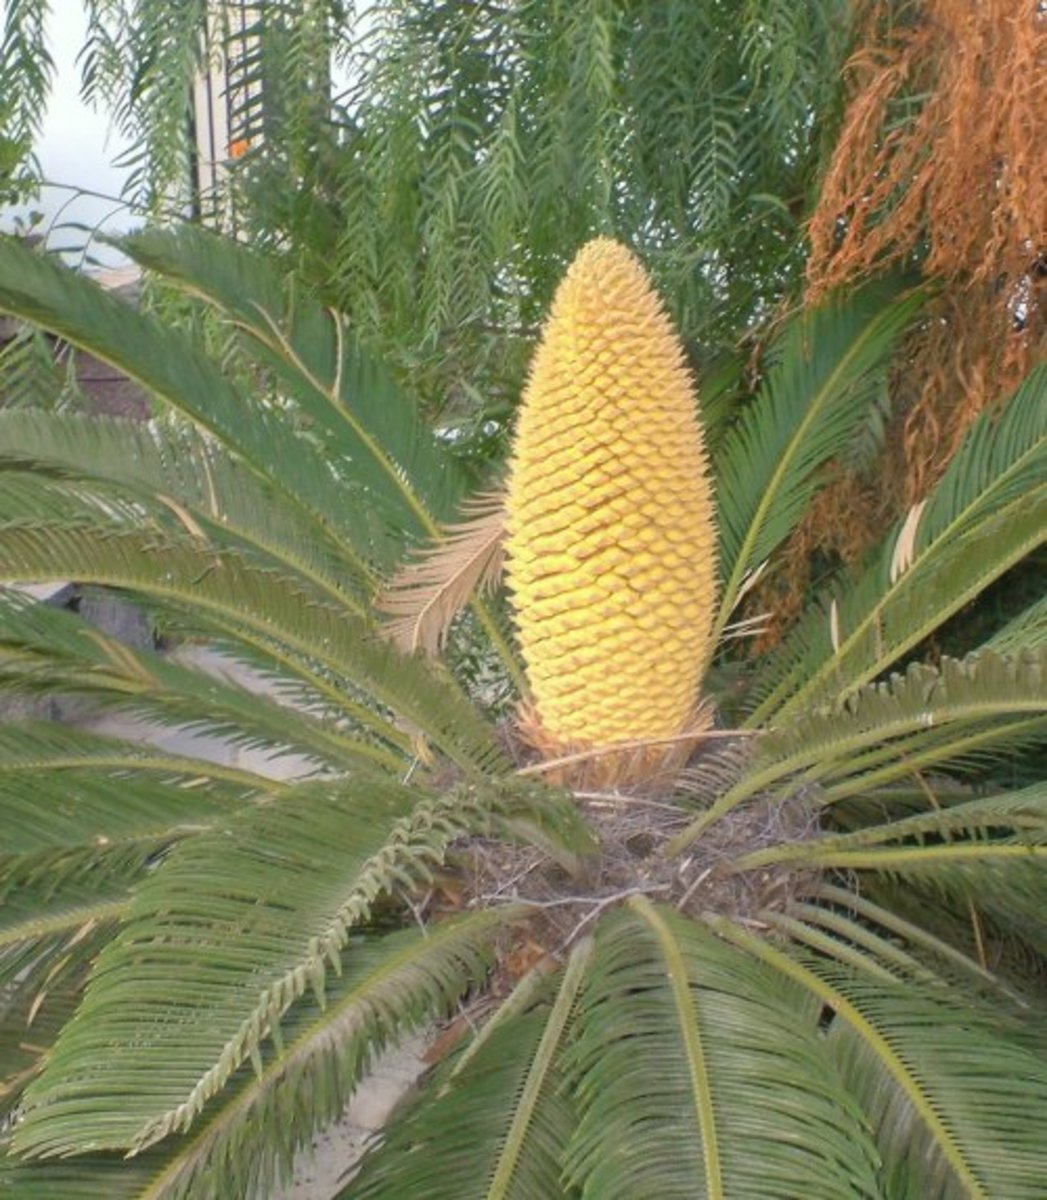 Male Sago palm. Photo by Steve Andrews